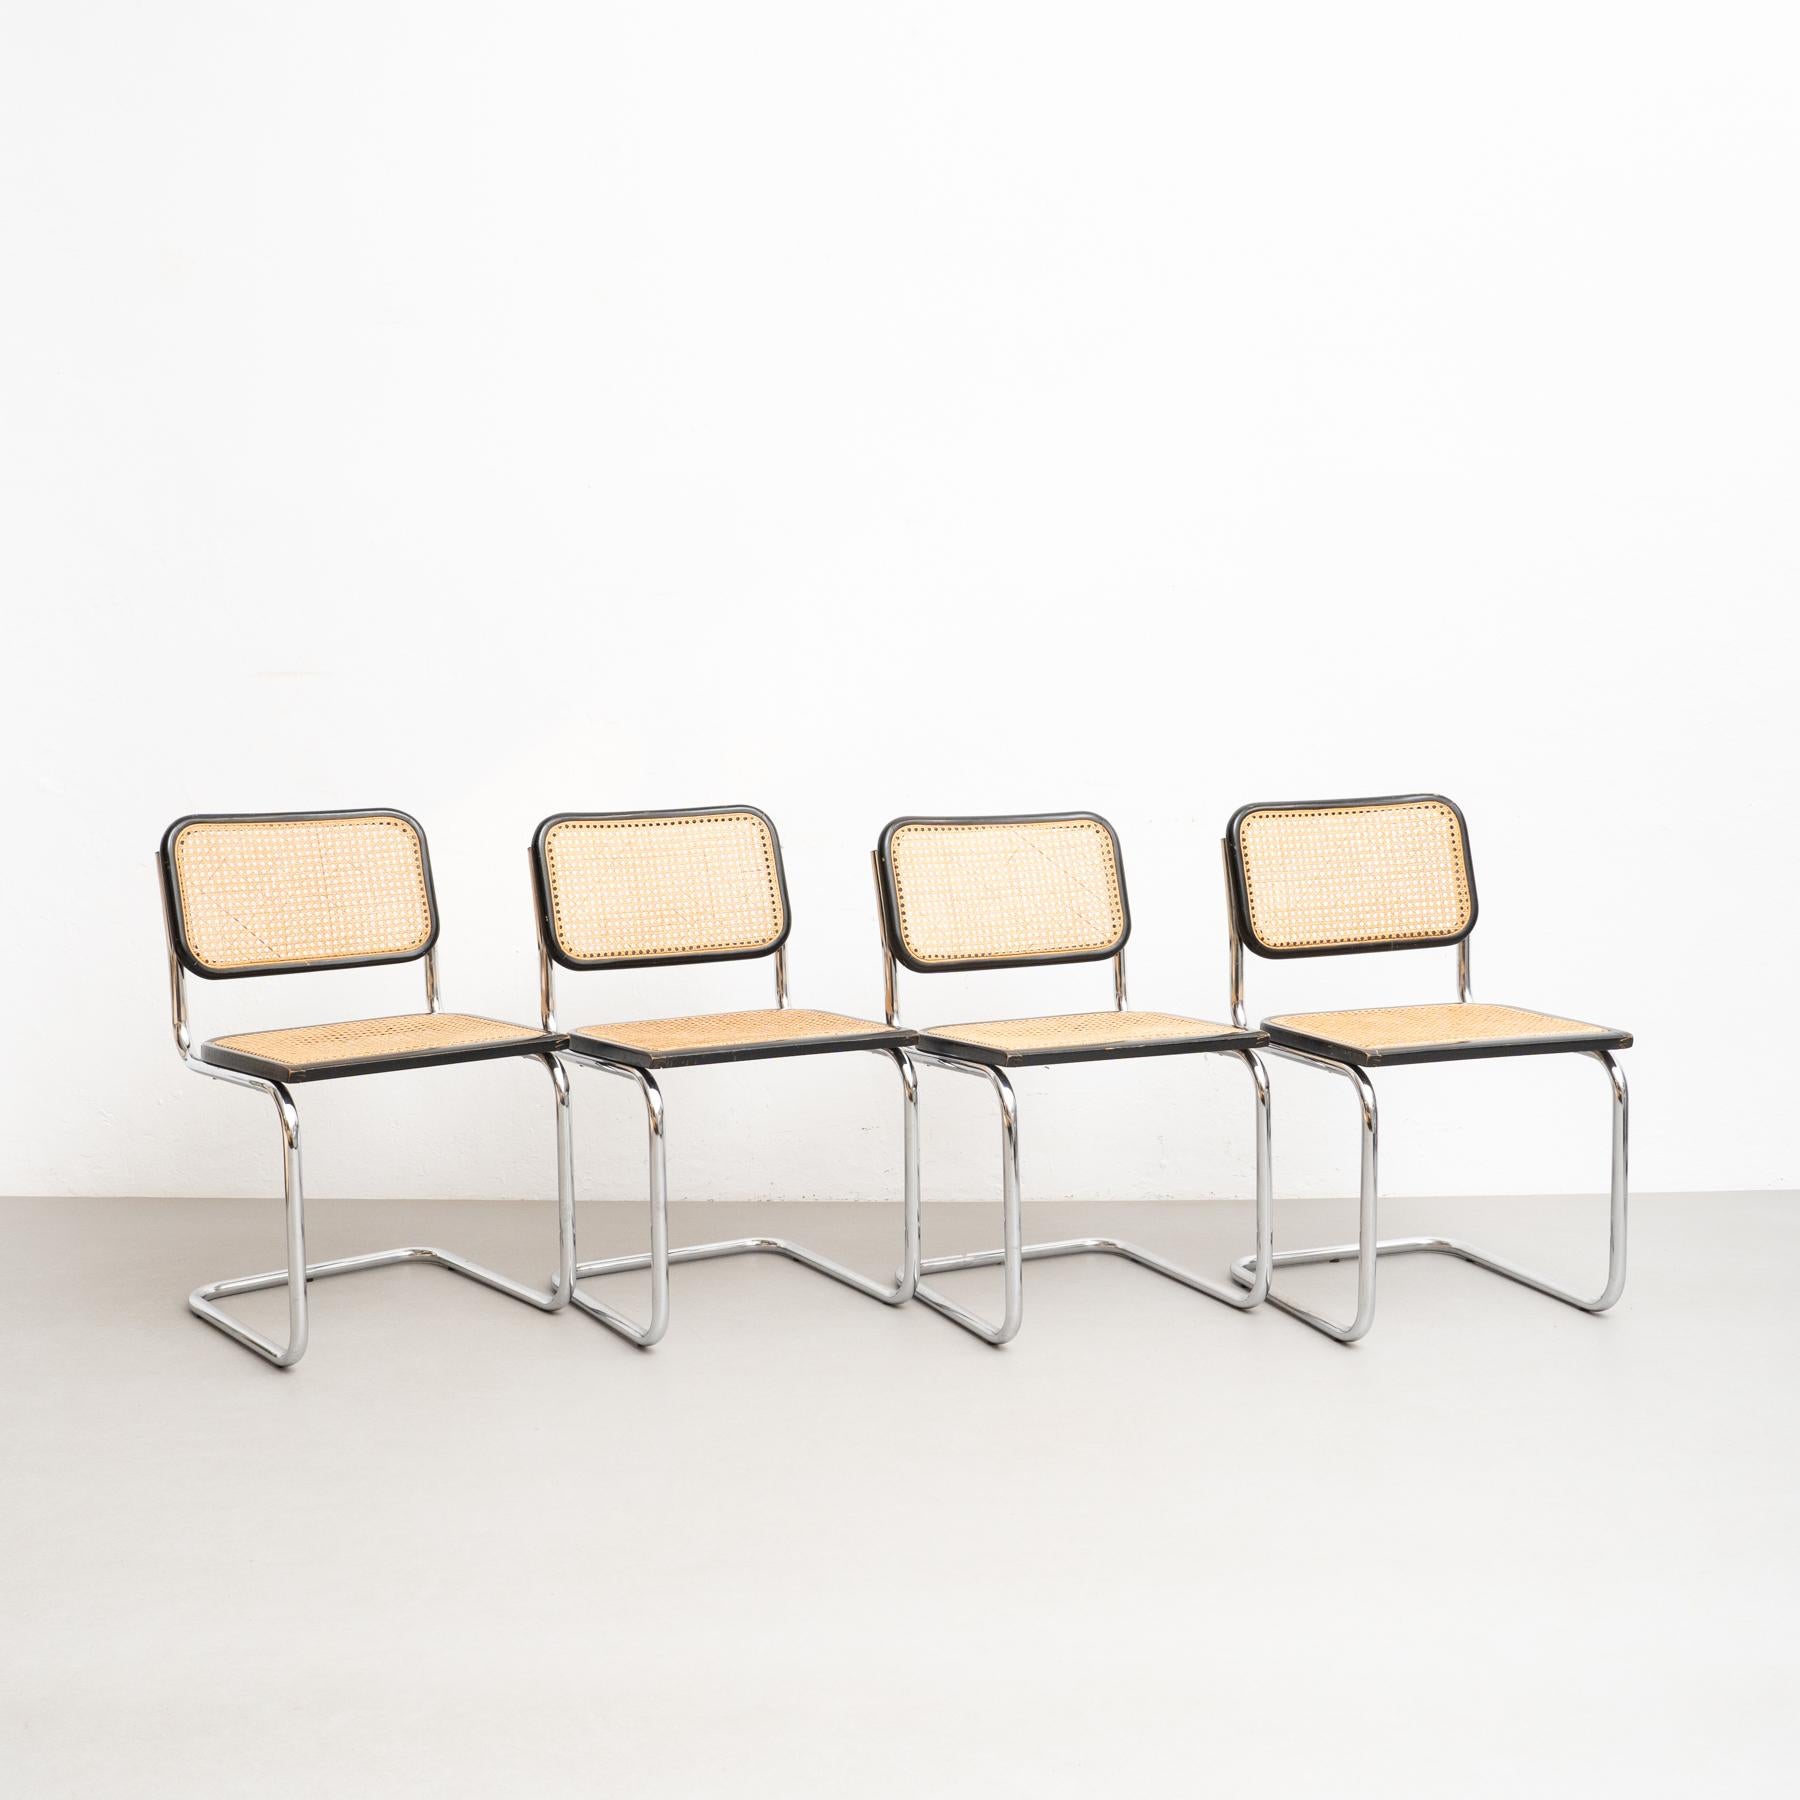 Set of 4 Cesca chairs, designed by Marcel Breuer.

Manufactured in Italy, circa 1960 by Gavina.

Metal pipe frame, wood seat and back structure and rattan.

In good original condition, with minor wear consistent with age and use, preserving a